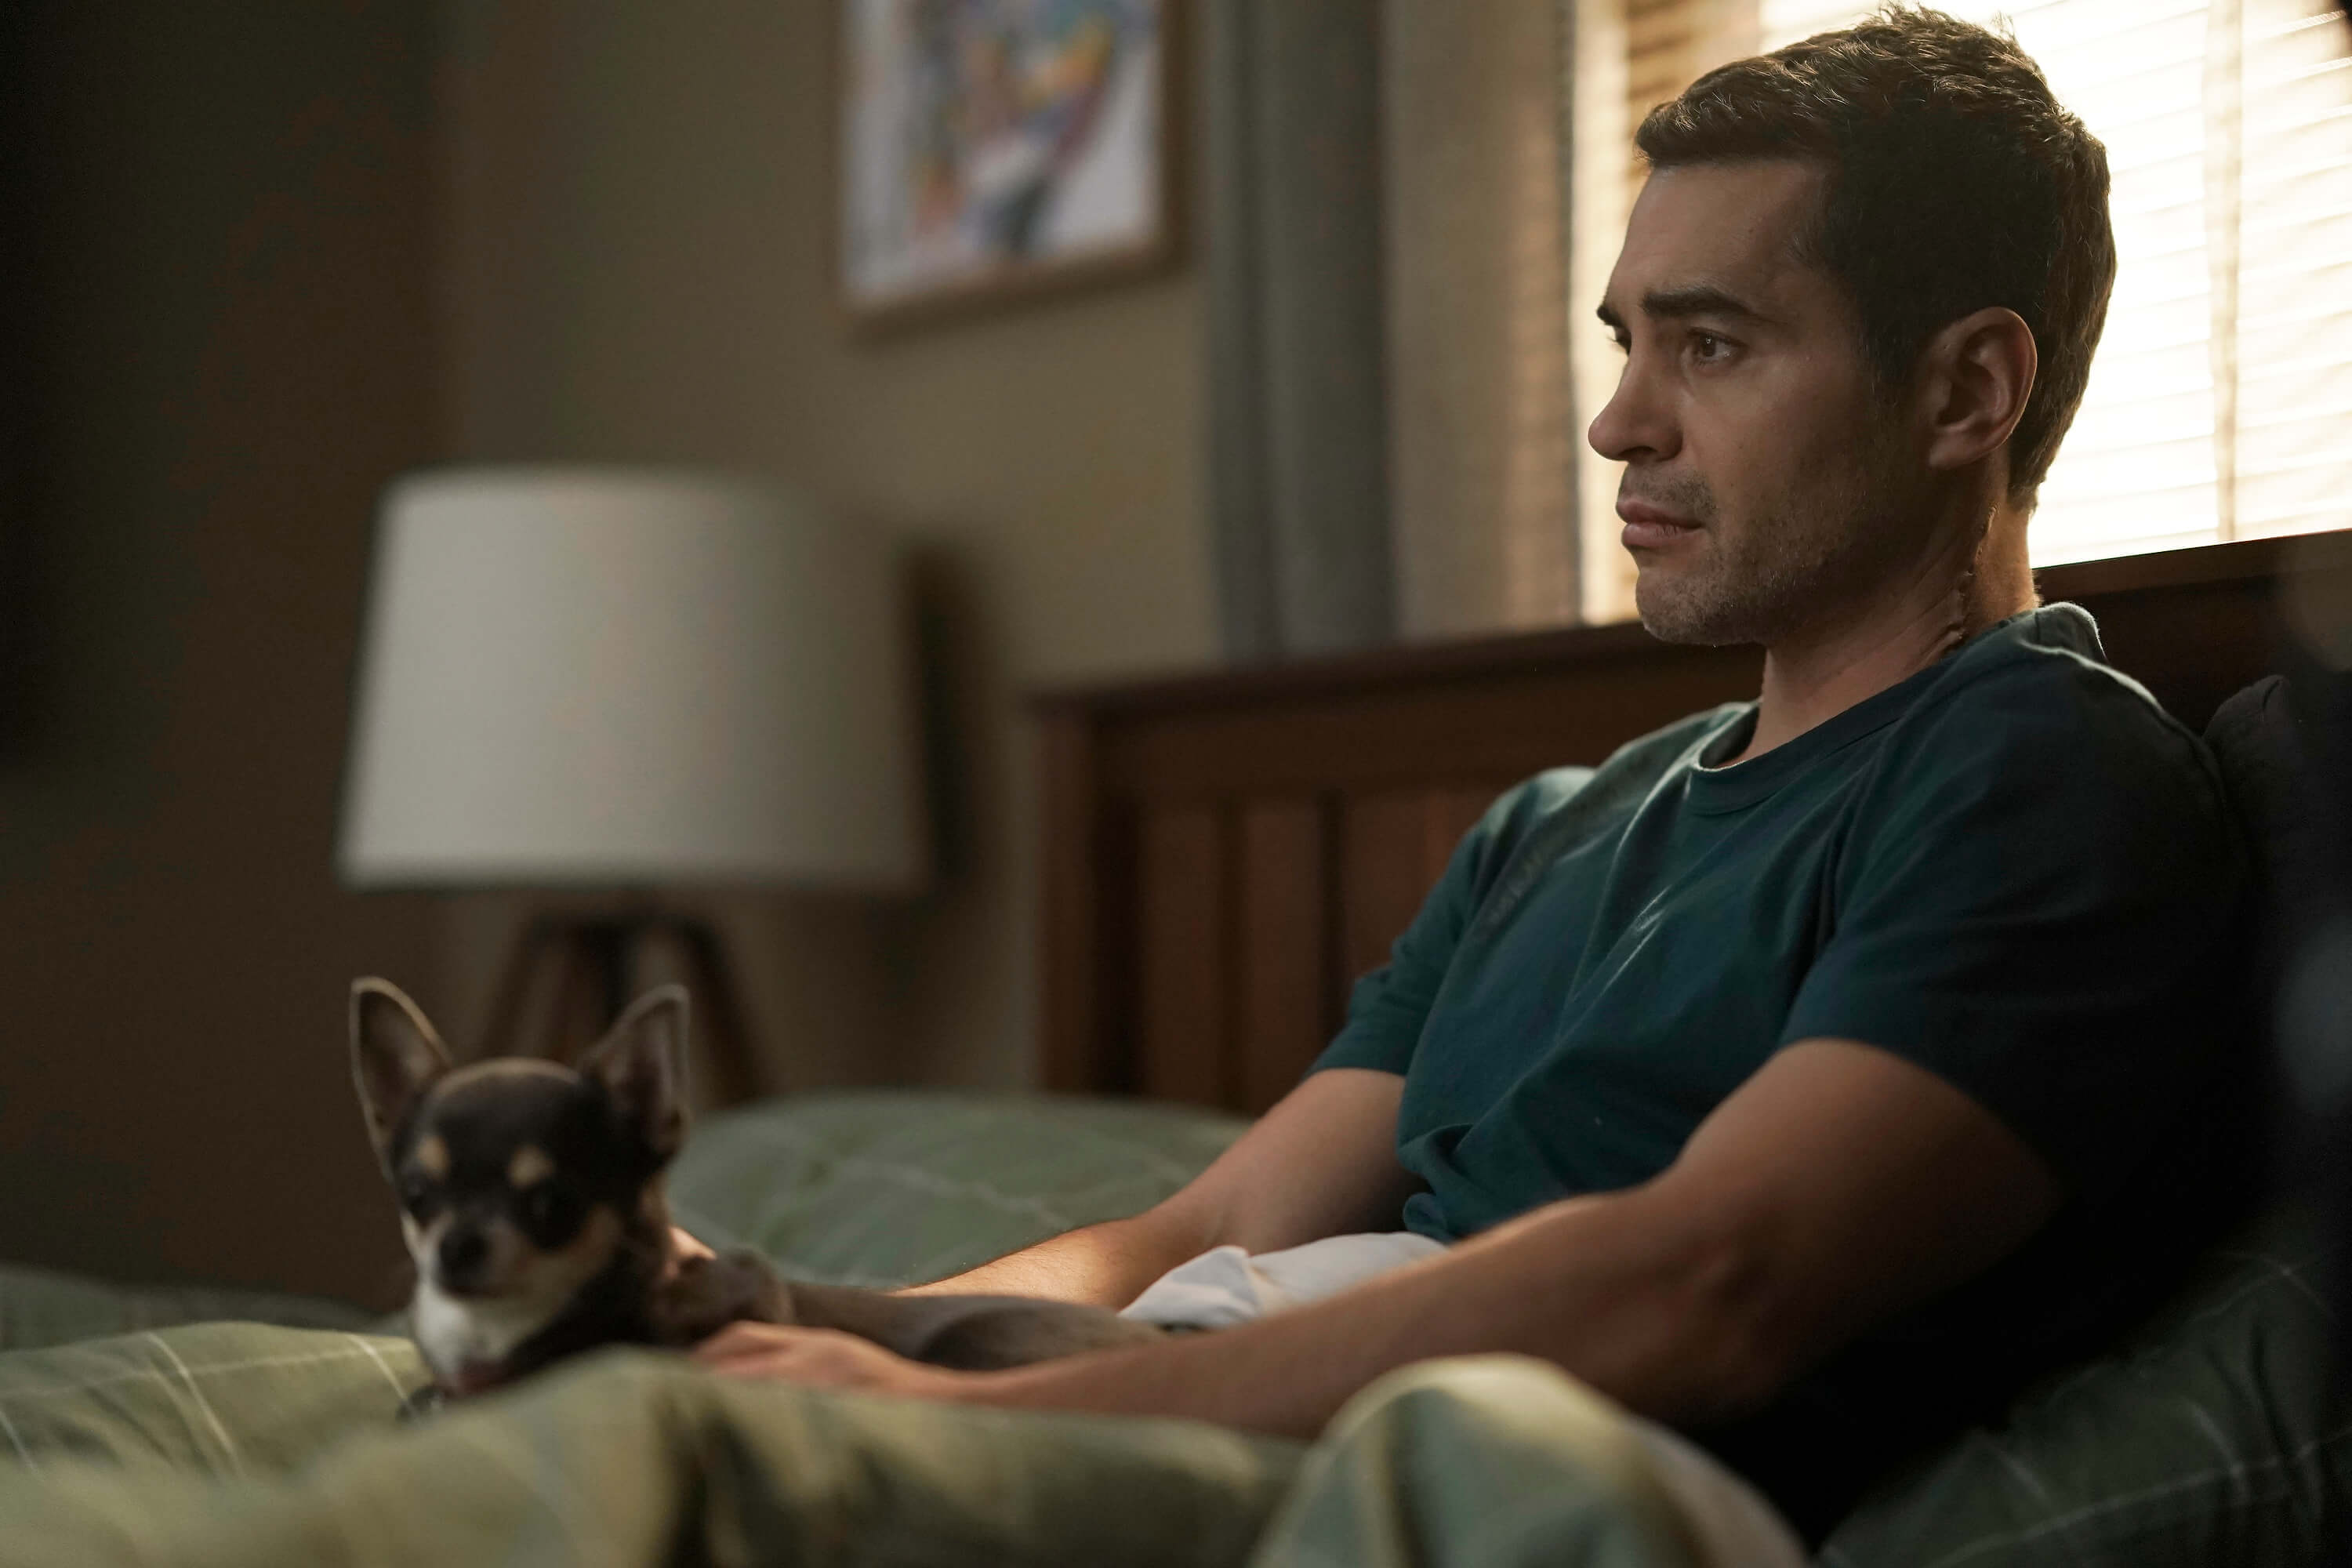 Ramón Rodríguez, in character as Will Trent in the new series 'Will Trent' on ABC, wears a blue shirt while sitting in bed with his chihuahua Betty on his lap.